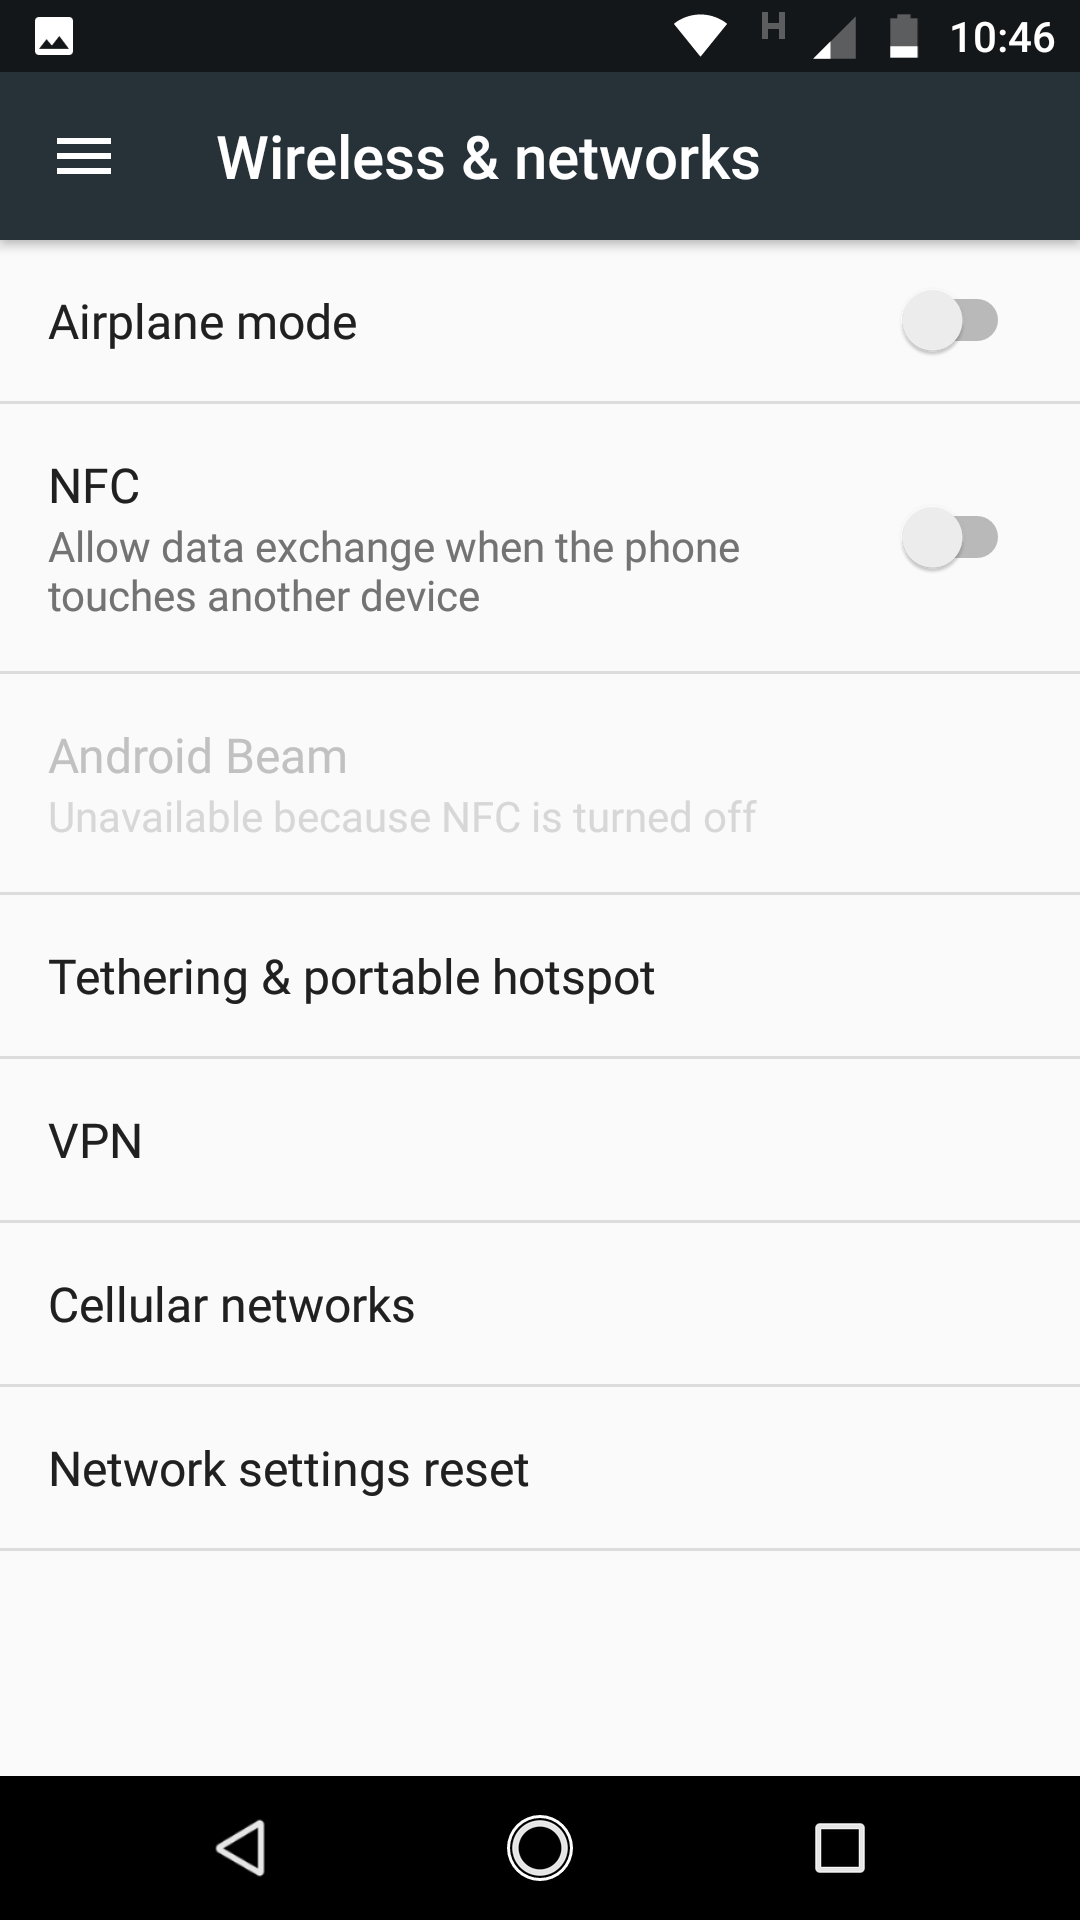 How to reset network settings in Android Nougat - GadgetDetail